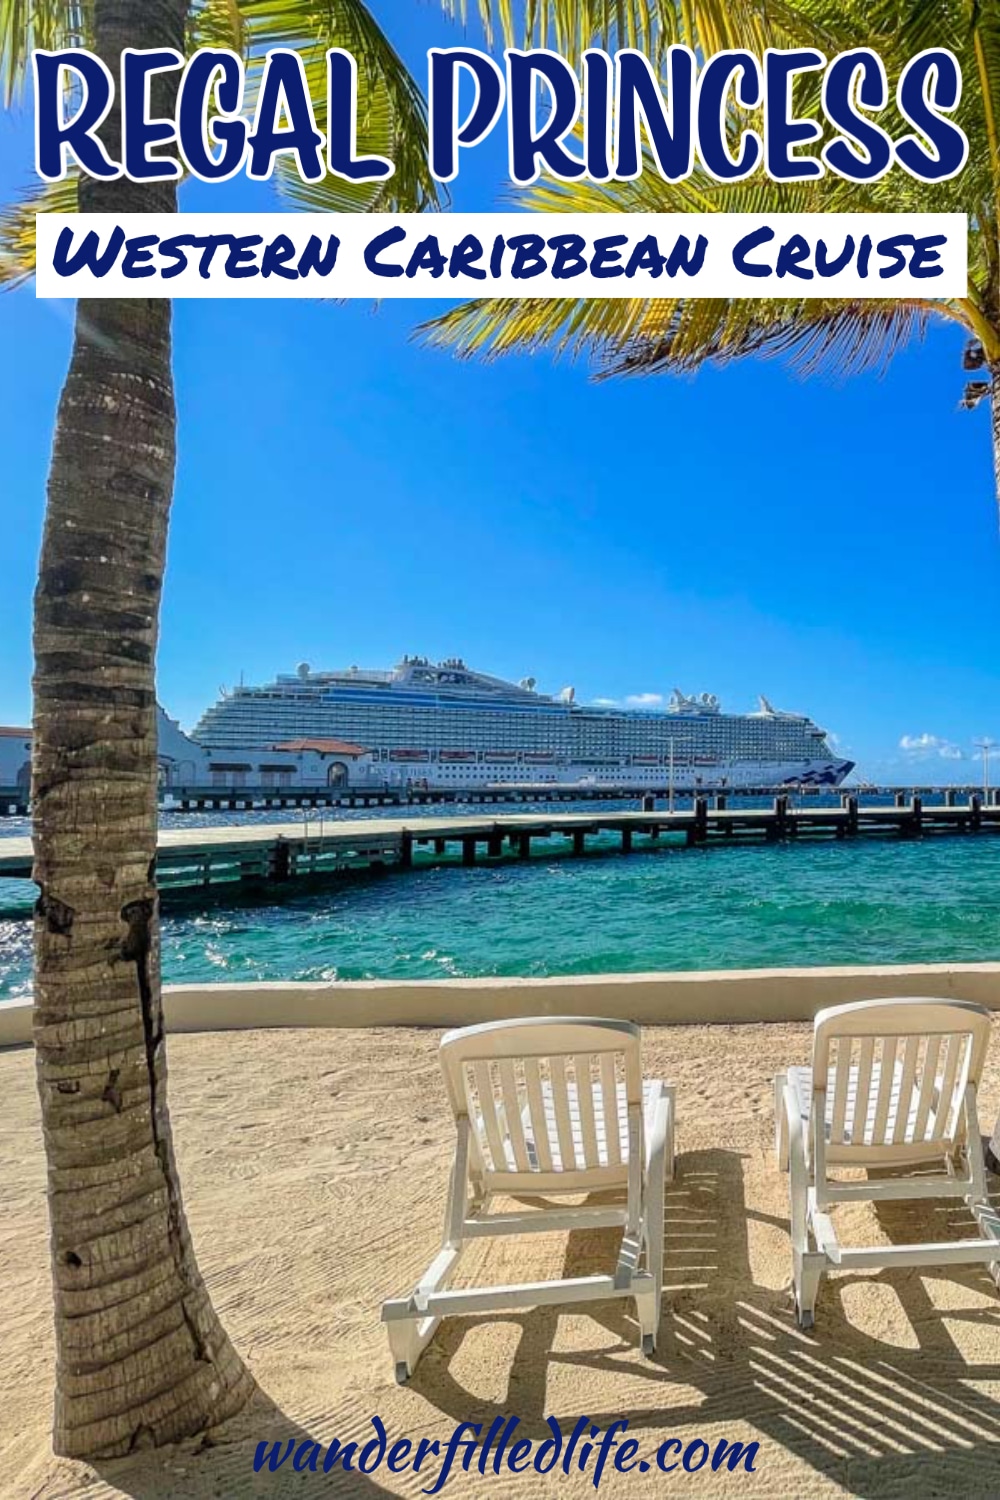 Our review of a 5-night Western Caribbean cruise aboard the Regal Princess. With a wide range of dining, you're sure to enjoy this ship.